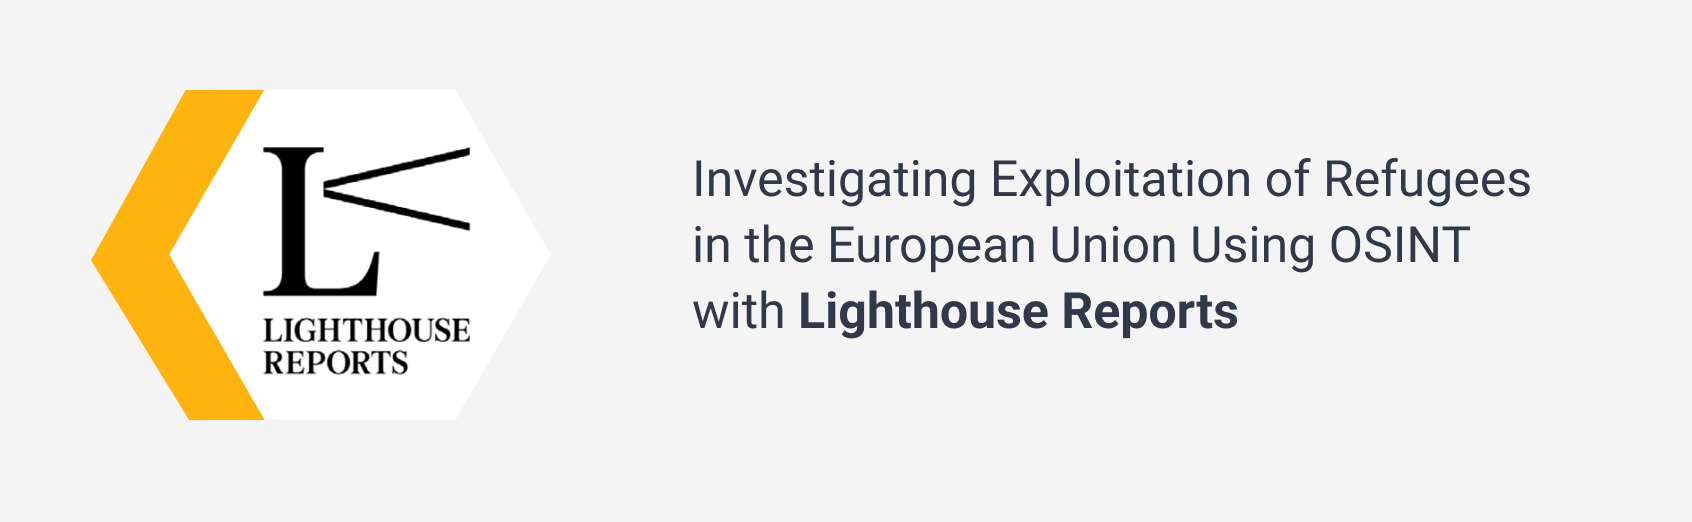 Investigating Exploitation of Refugees in the European Union Using OSINT with Lighthouse Reports